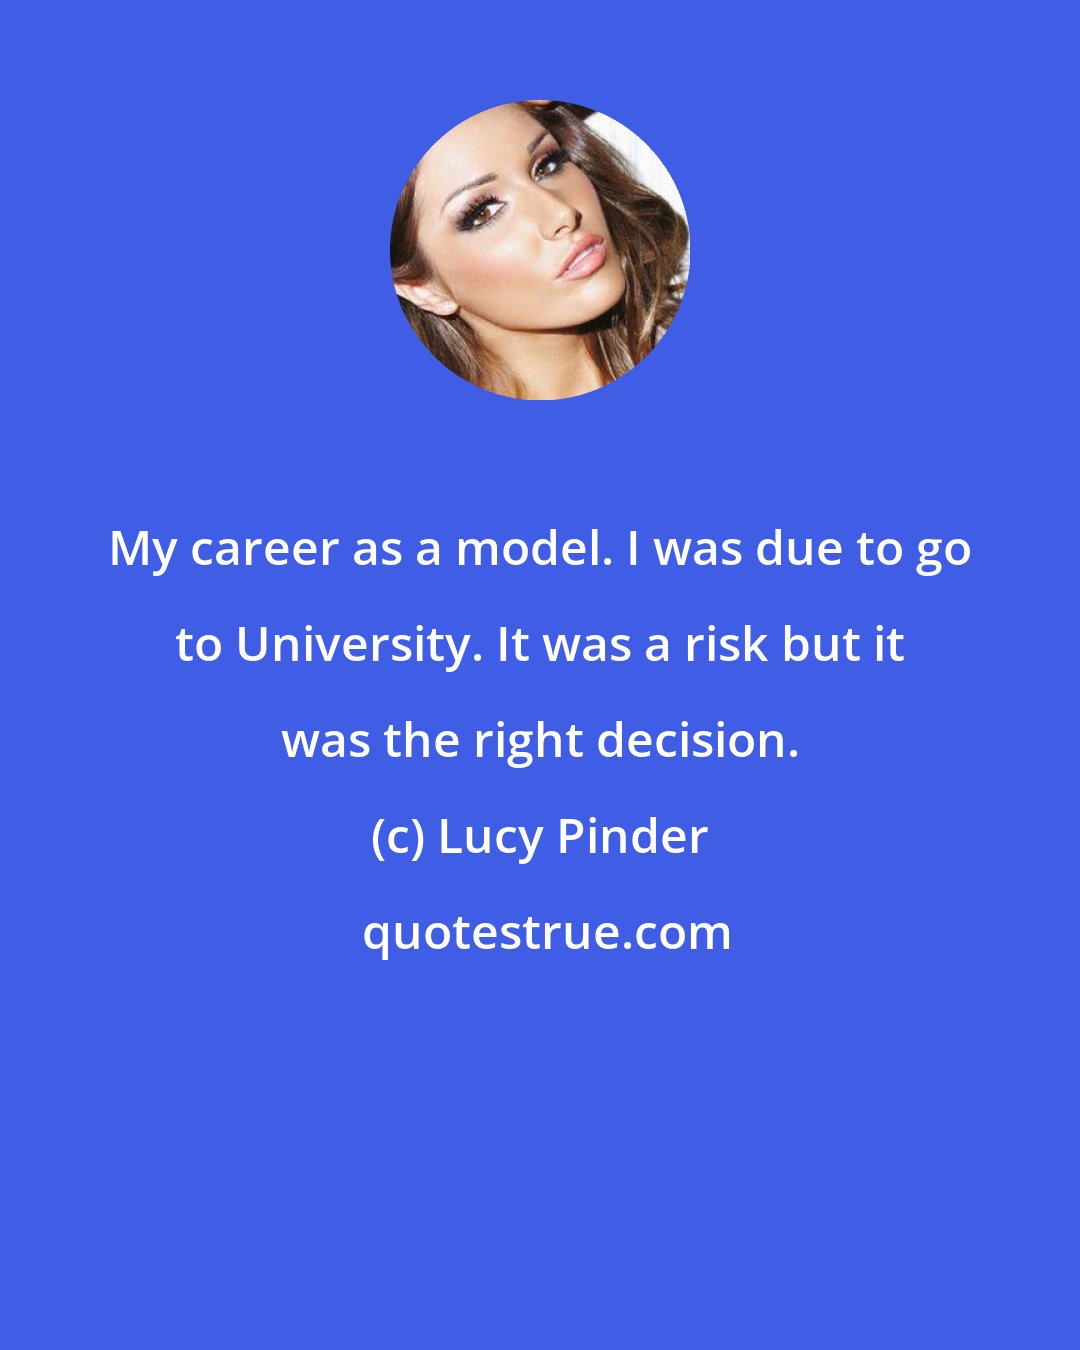 Lucy Pinder: My career as a model. I was due to go to University. It was a risk but it was the right decision.